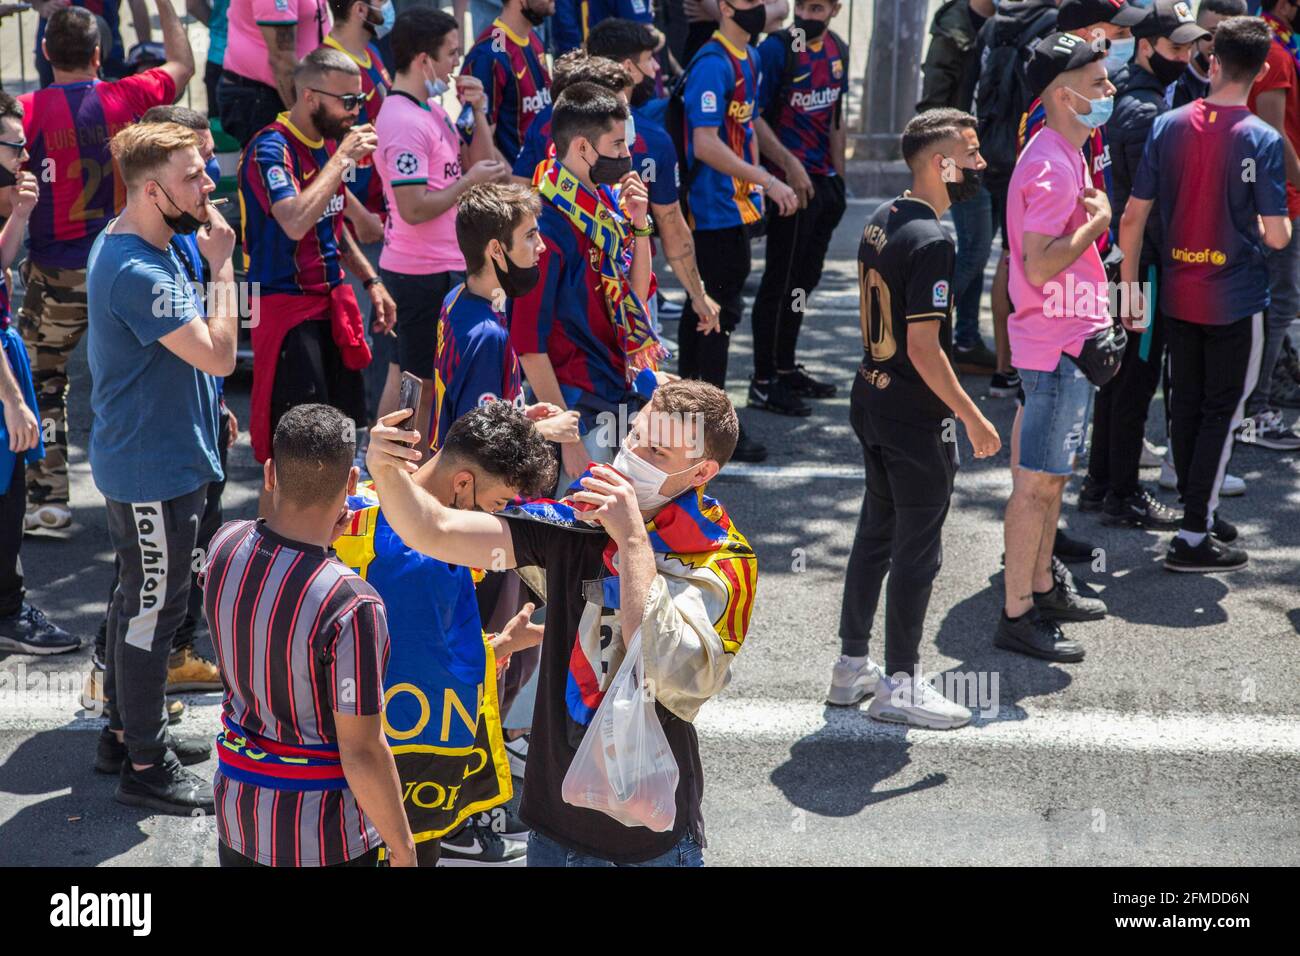 Barcelona, Spain. 08th May, 2021. Football Club Barcelona fan takes a selfie. The ultras supporter group of Football Club Barcelona, Boixos Nois (Crazy Boys) have gathered outside the Camp Nou stadium to motivate the team before the match against Club Atletico de Madrid for the 35th round of La Liga, the Spanish football league. Barça's victory will put the team, currently in third place, ahead of Atletico de Madrid, which occupies the first position. (Photo by Thiago Prudencio/SOPA Images/Sipa USA) Credit: Sipa USA/Alamy Live News Stock Photo